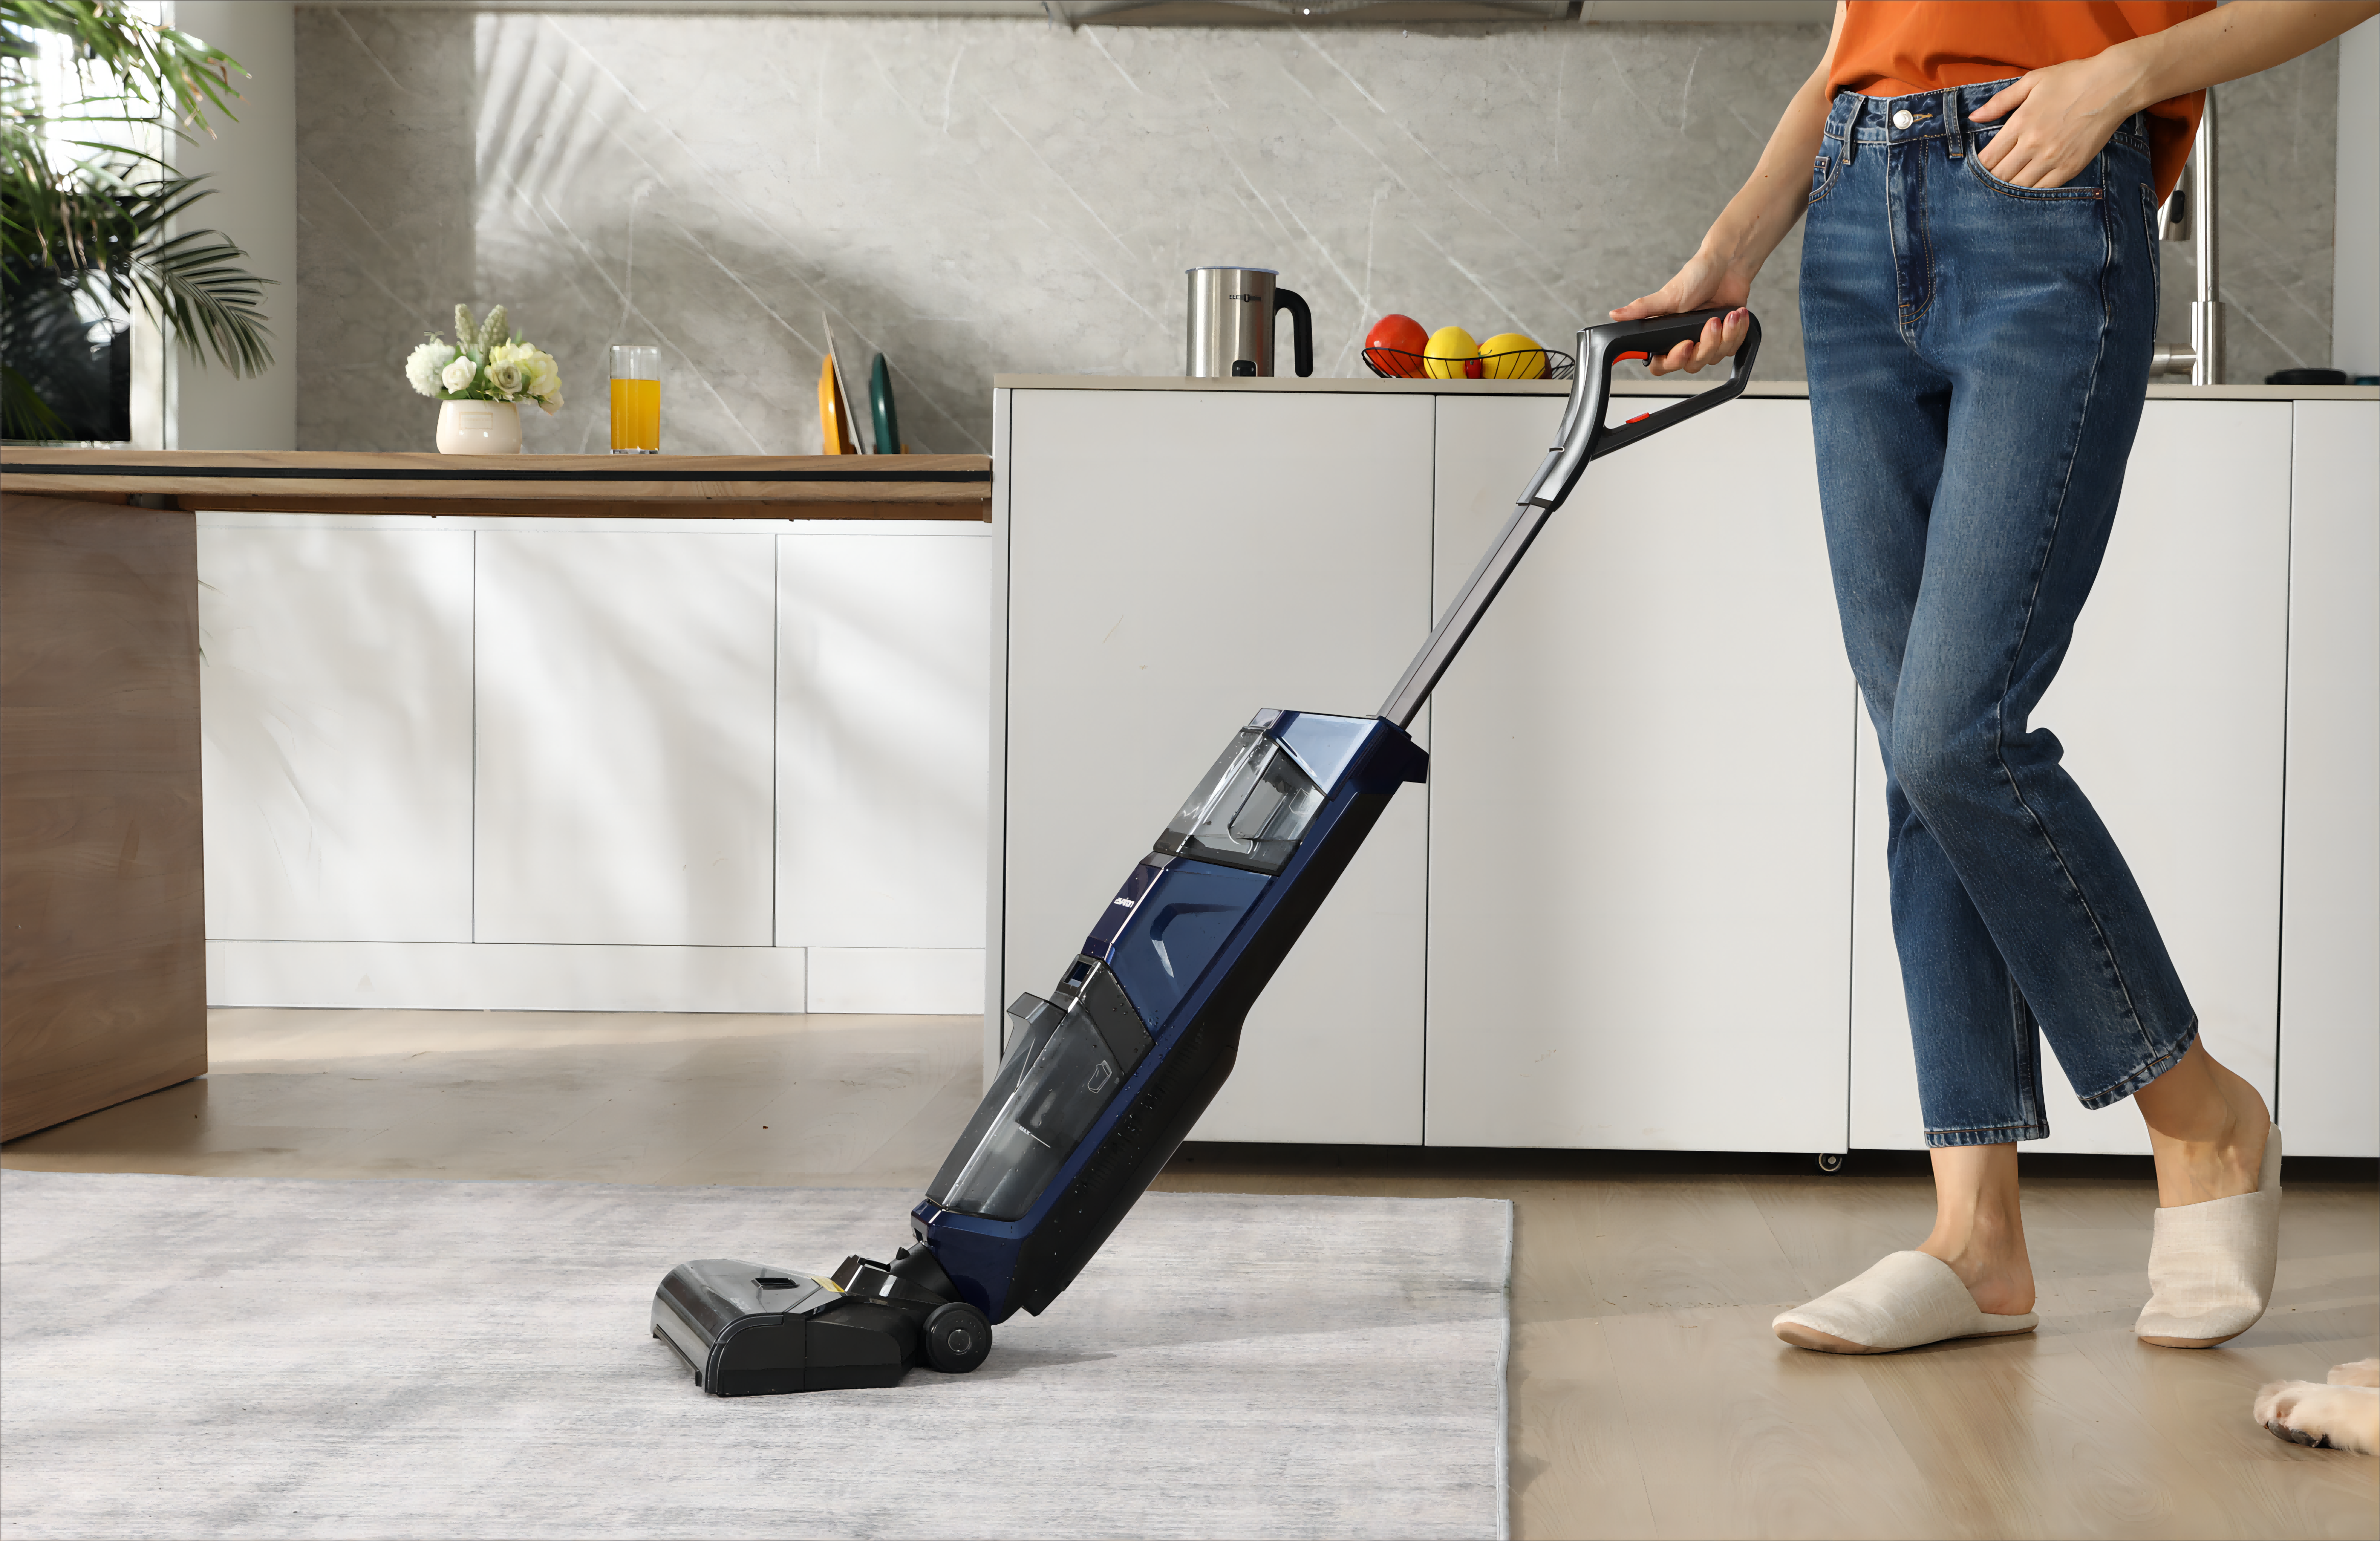 Cordless Wet Dry Vacuum Cleaner, Hardwood Floor Cleaner Vacuum Mop All in  One with Self-Cleaning & Air Drying, LED Display, Smart Voice Assistant